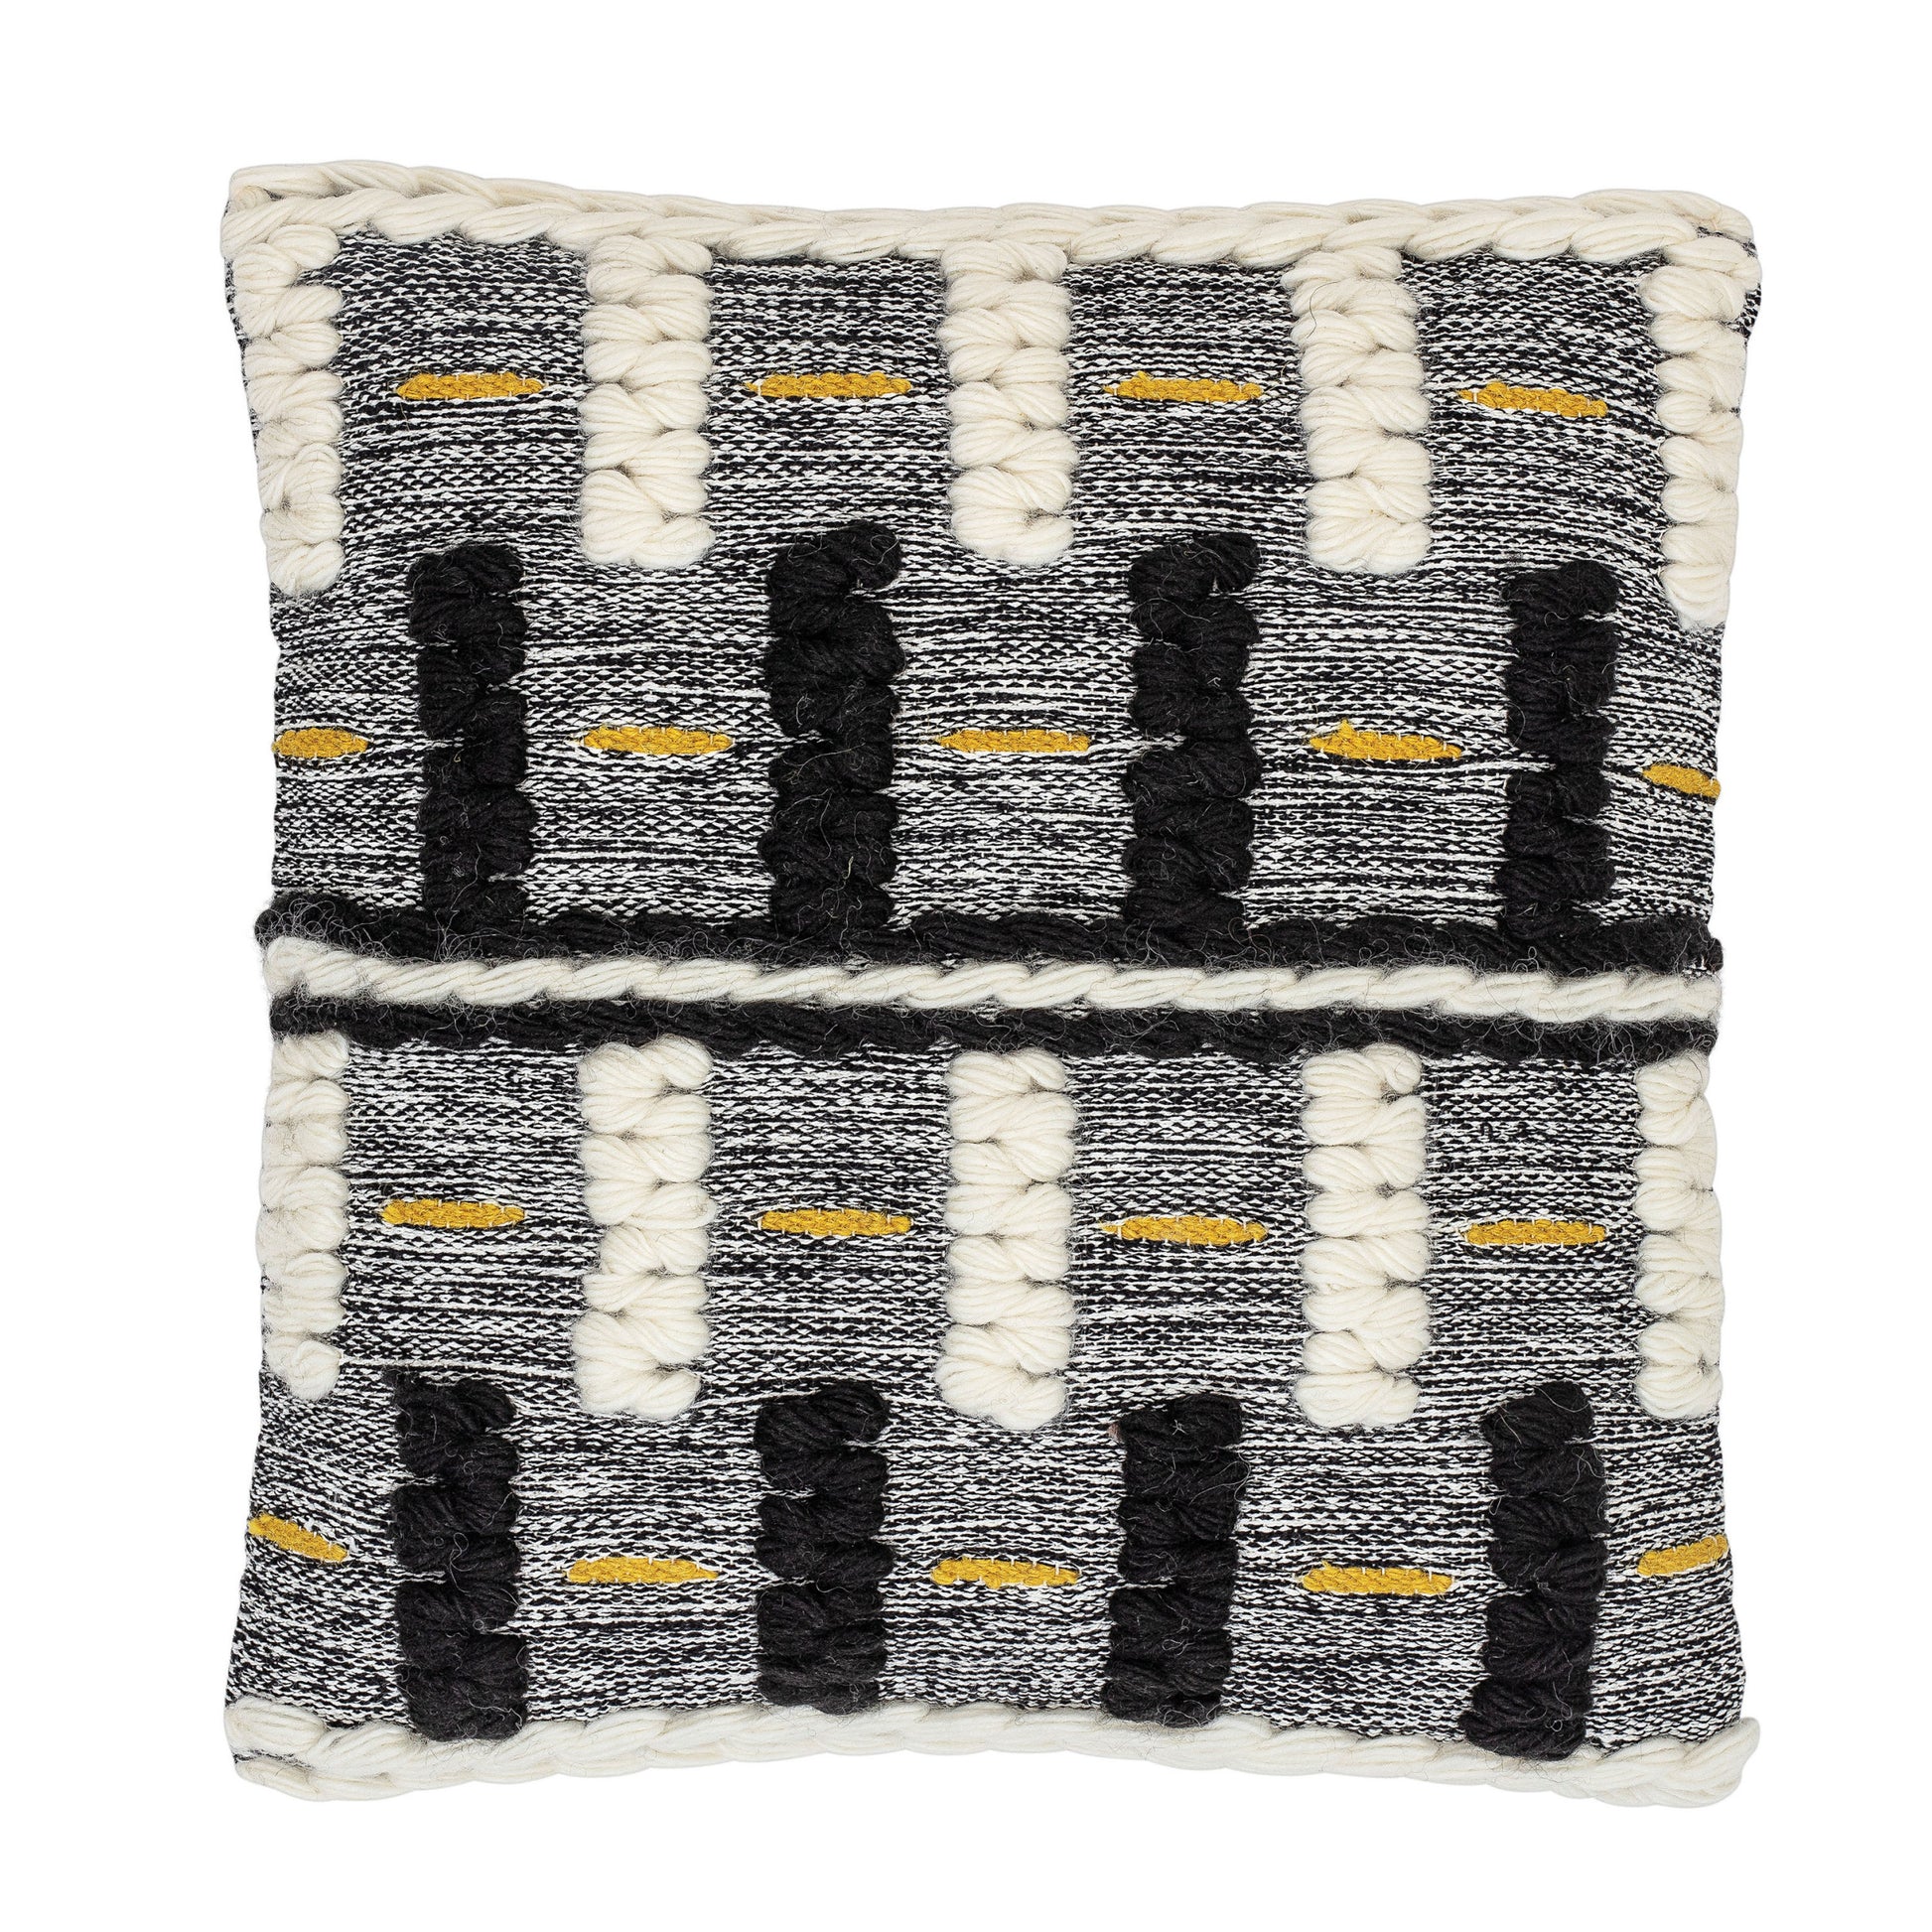 Throw Pillow - Square Wool Woven 20" Multi-Color